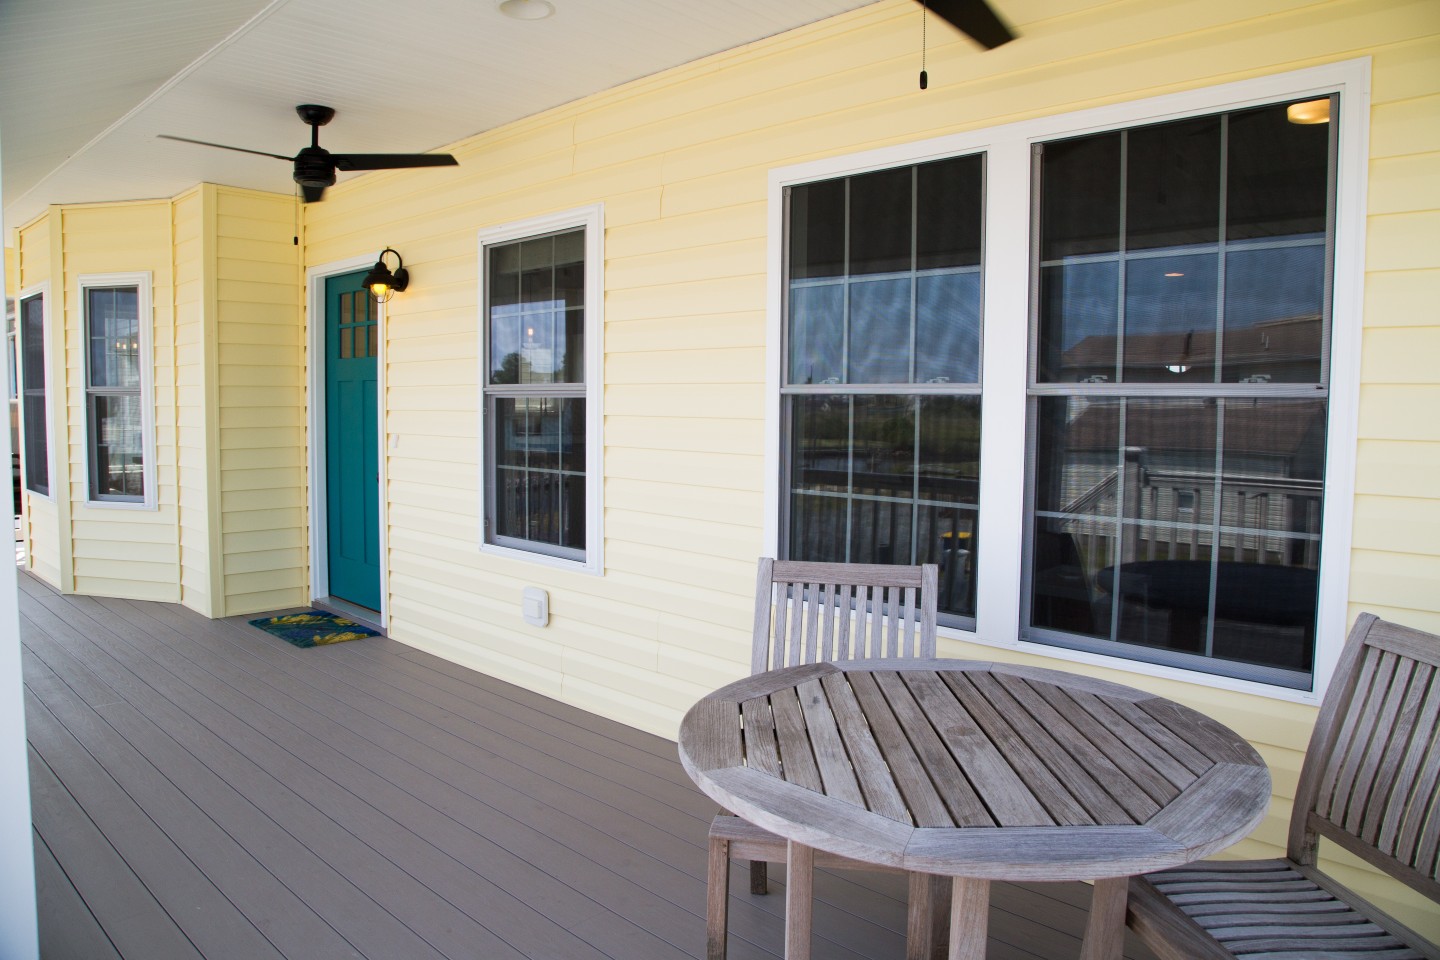 Exterior Porch with Yellow Siding, Wooden Round Table and Chairs